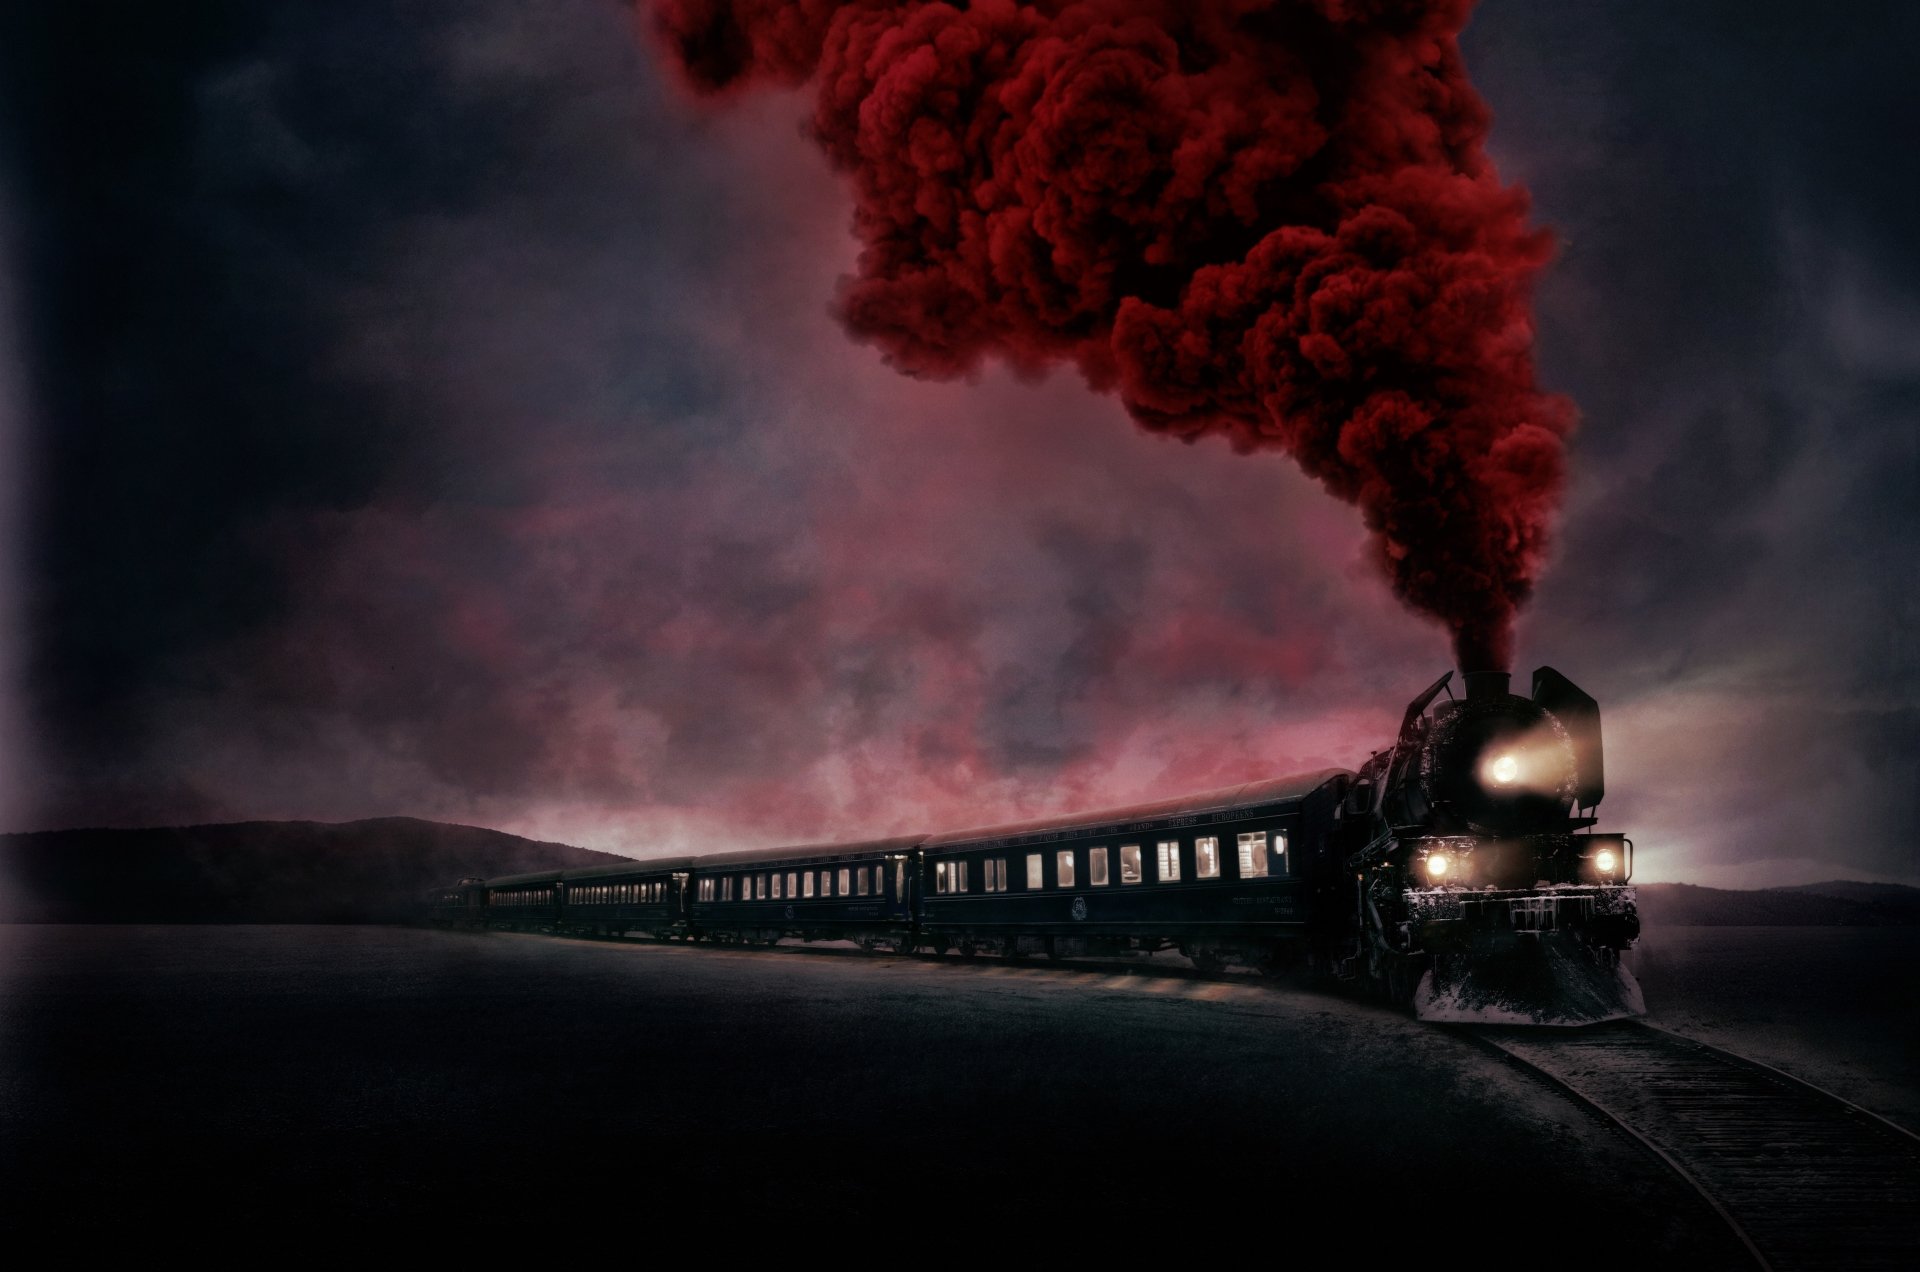 Murder On The Orient Express (2017) Wallpapers